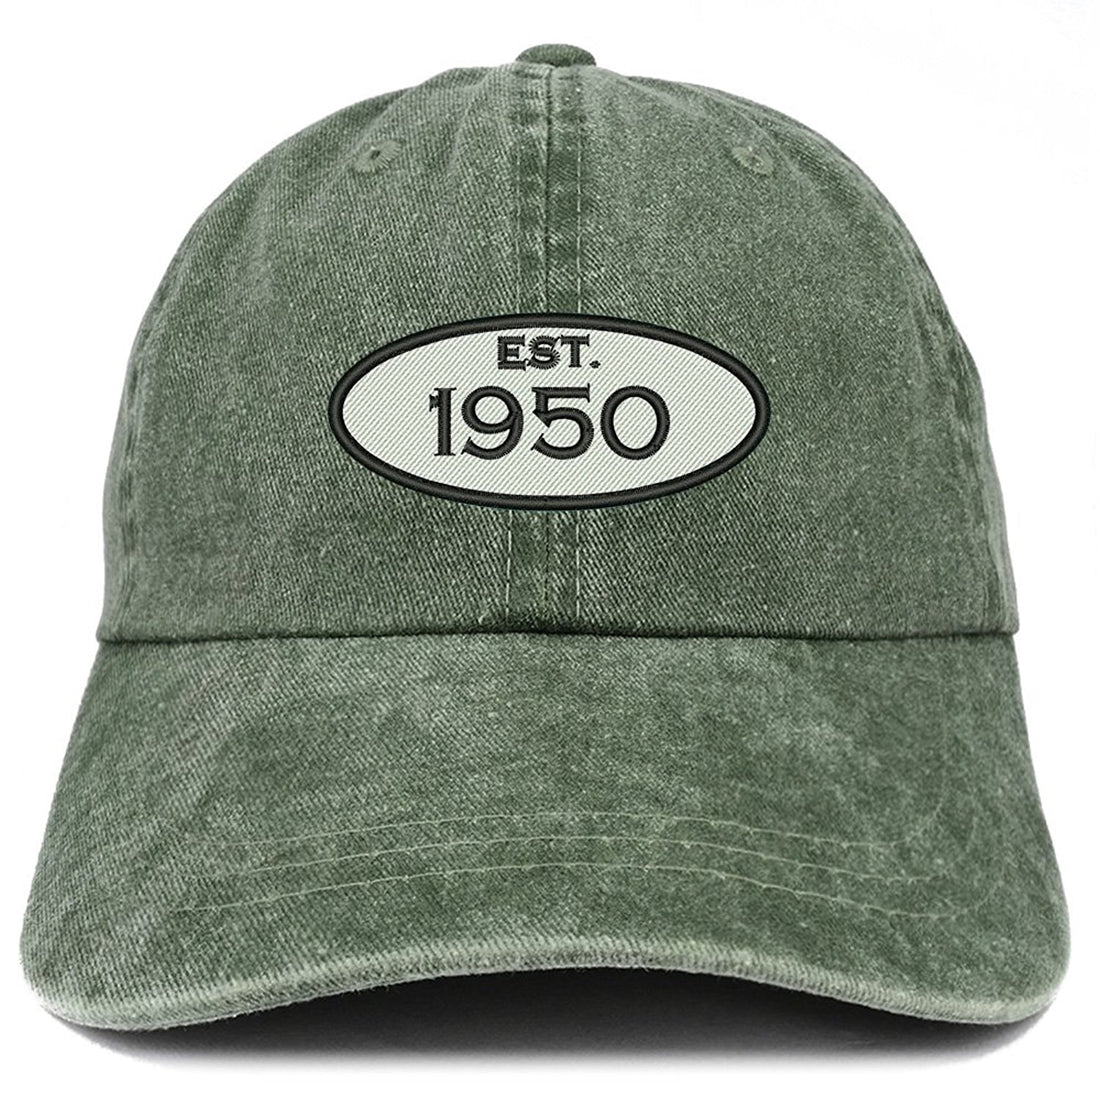 Trendy Apparel Shop Established 1950 Embroidered 69th Birthday Gift Pigment Dyed Washed Cotton Cap